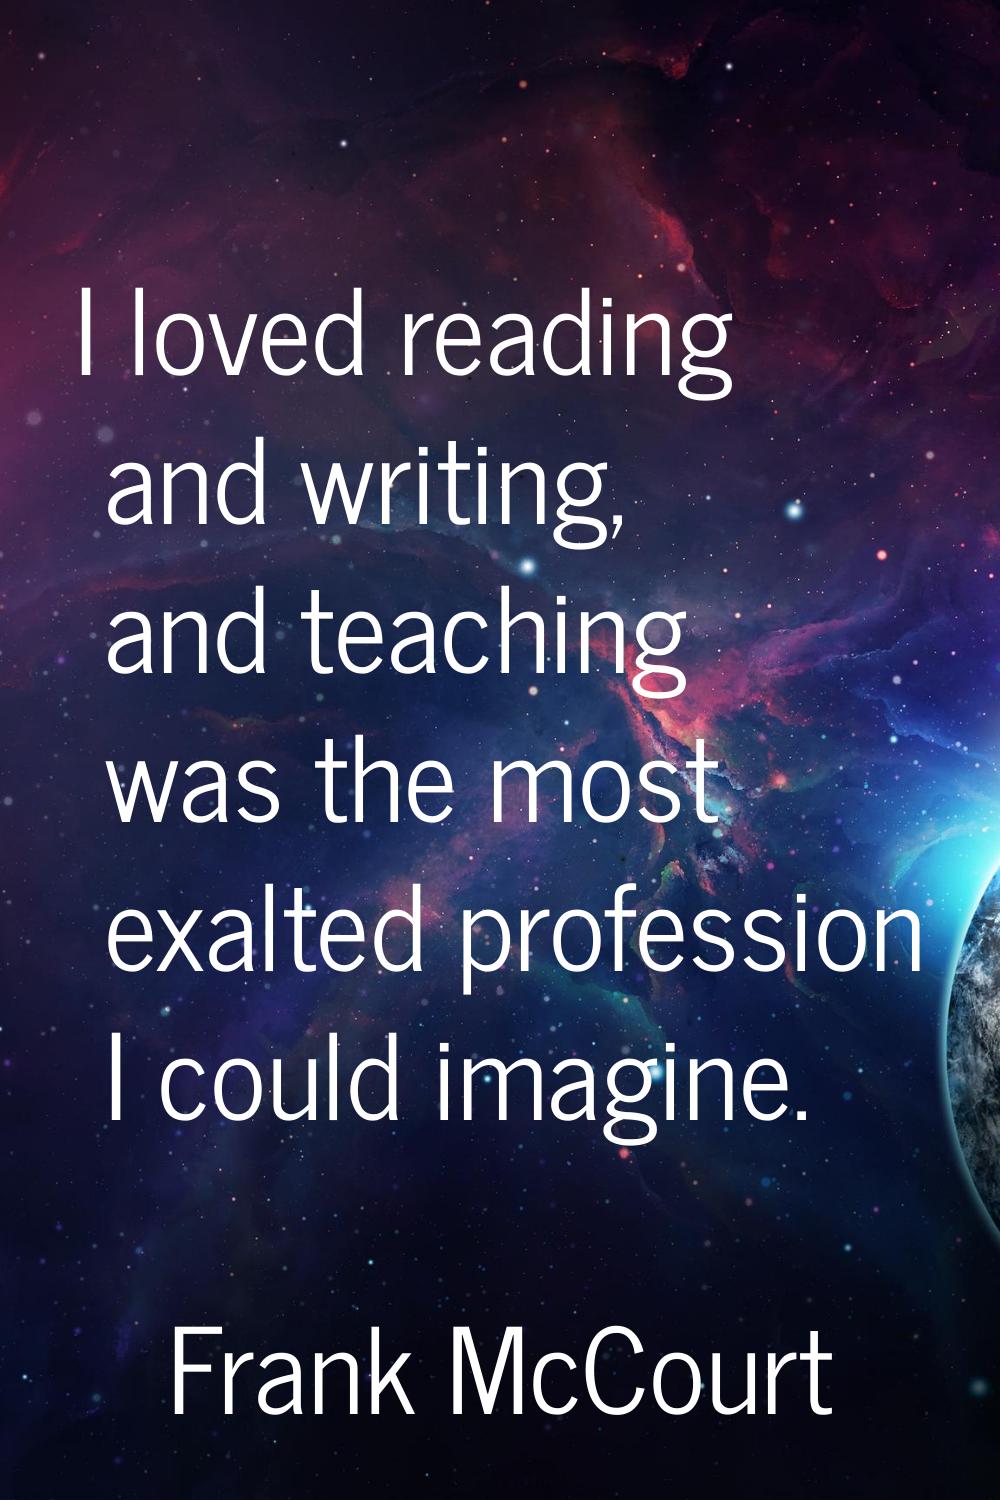 I loved reading and writing, and teaching was the most exalted profession I could imagine.